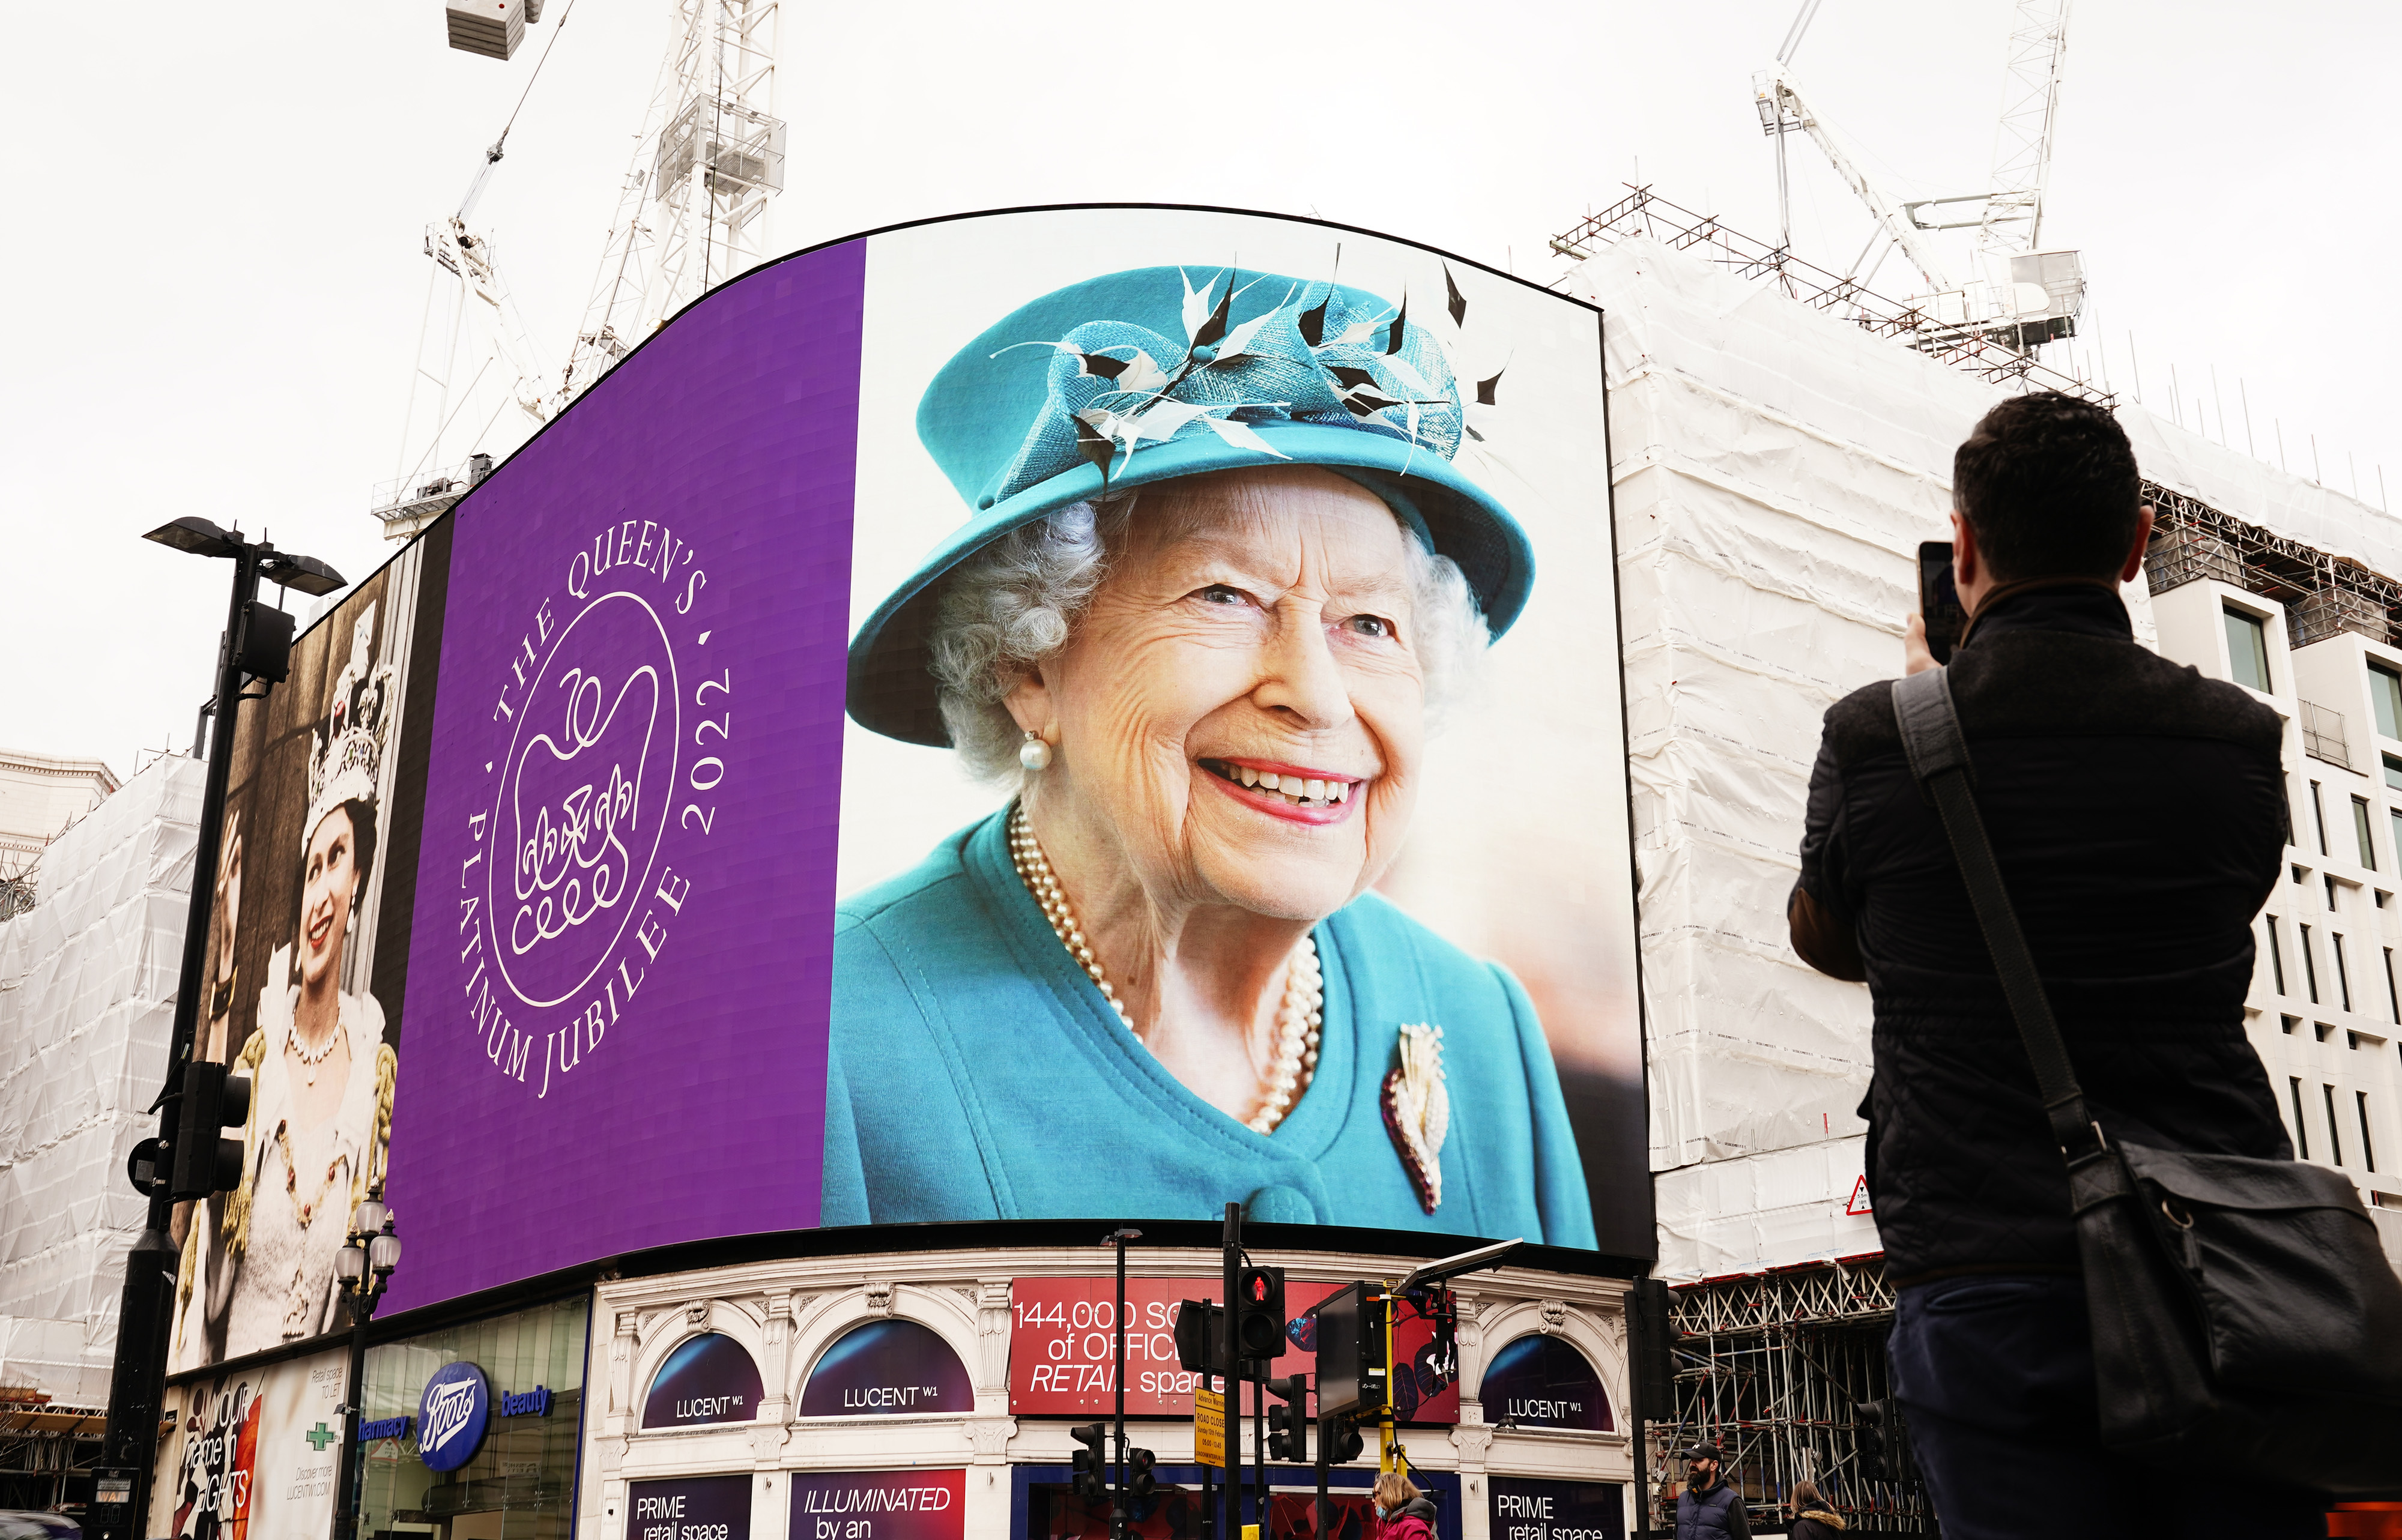 Queen's image at Piccadilly Circus